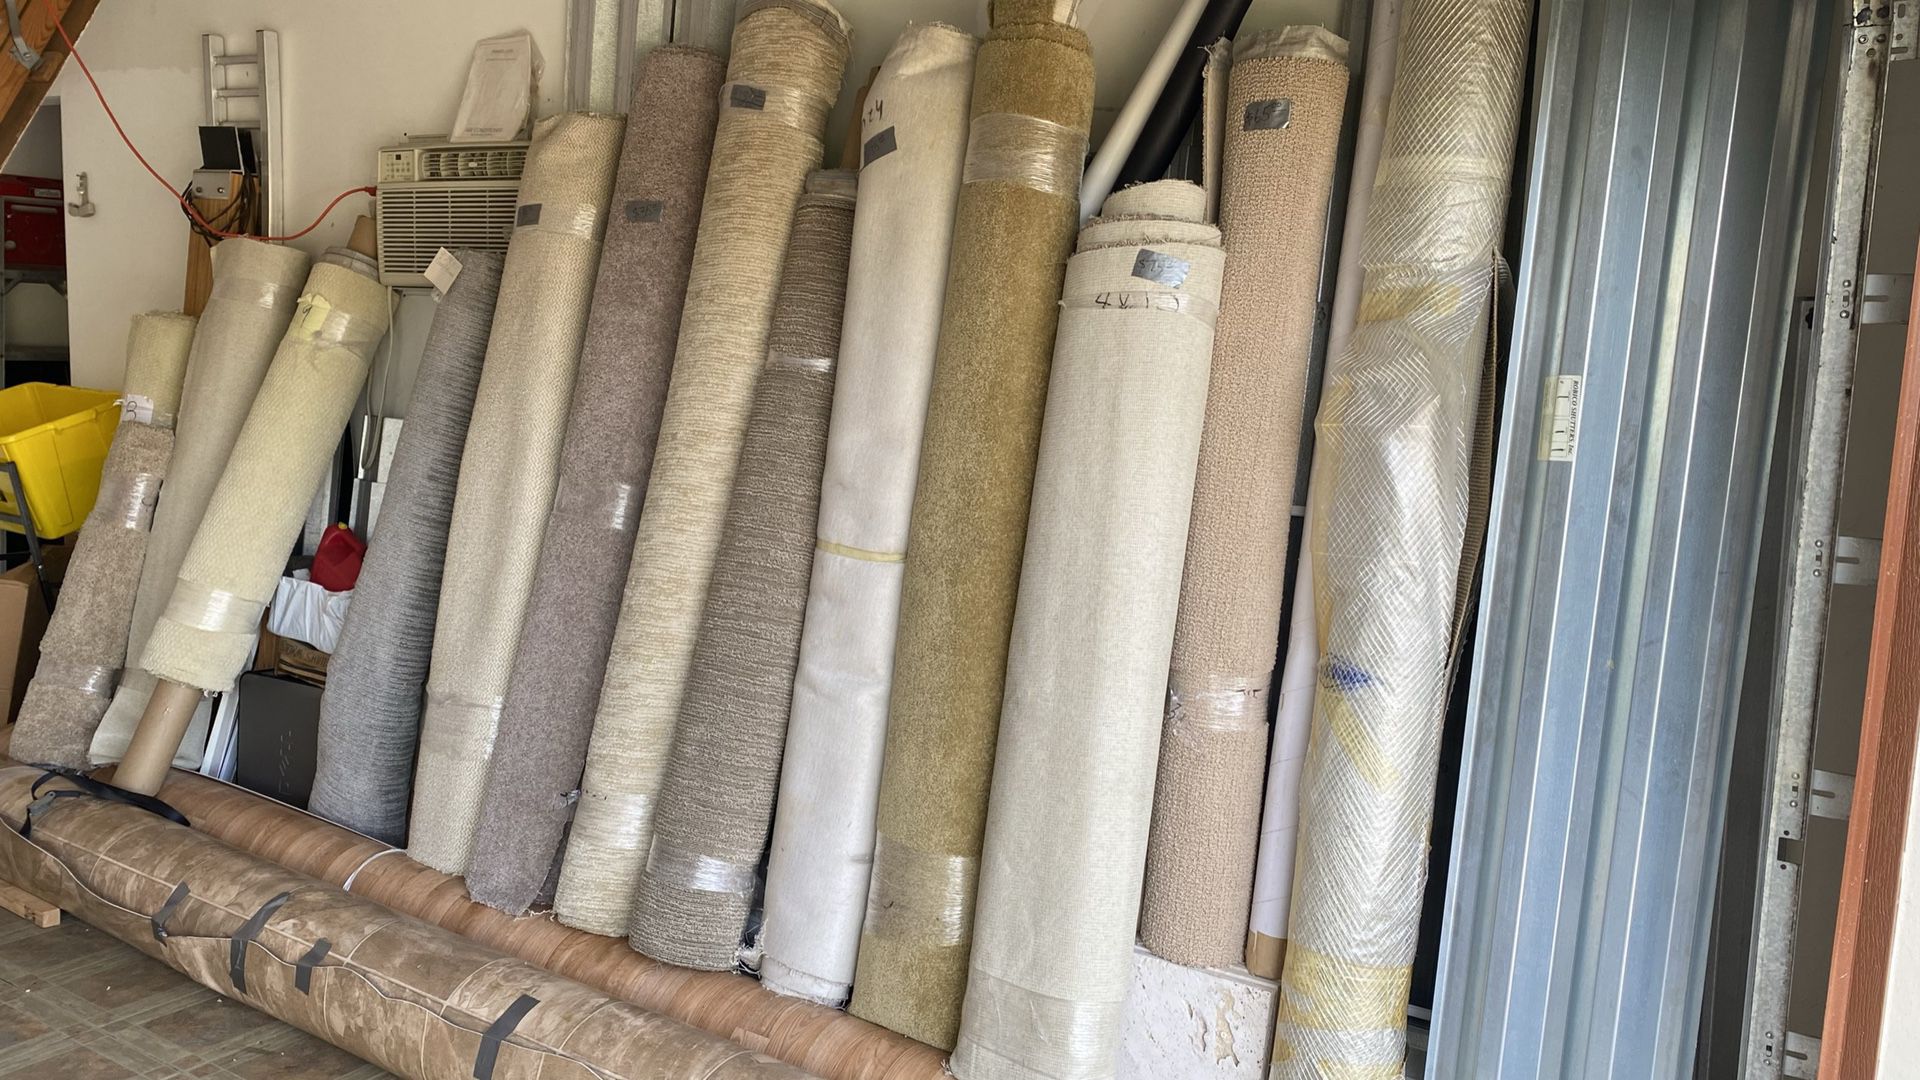 CARPET REMNANTS $49.up $375. Lake Worth for Sale in Lake Worth, FL - OfferUp